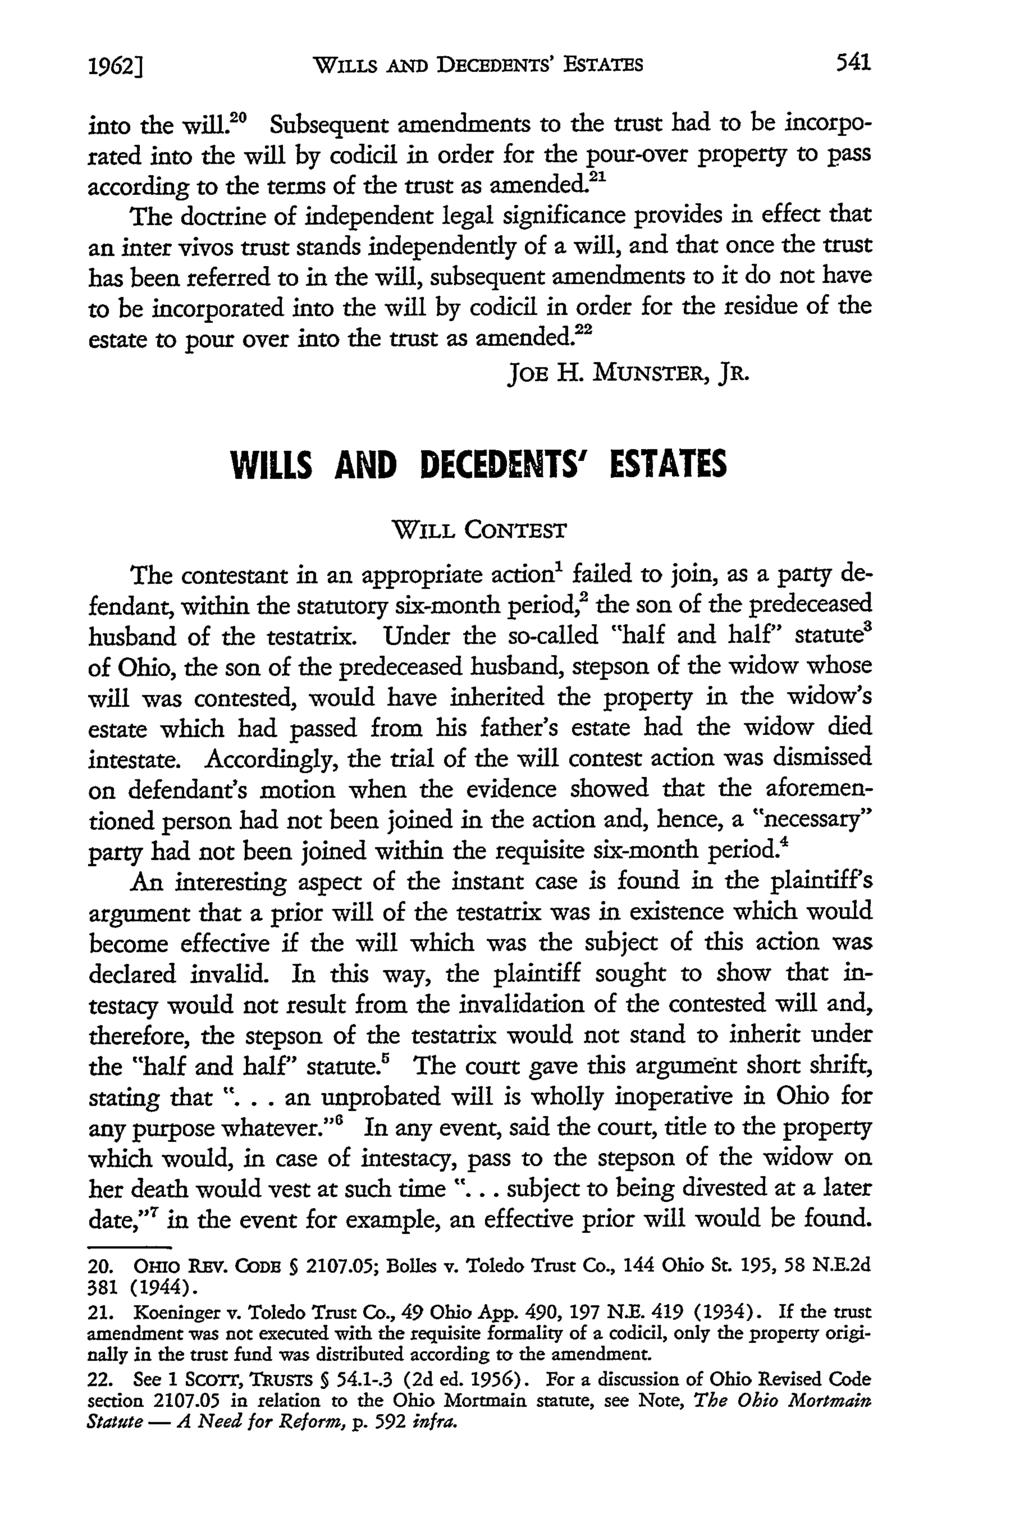 19621 'WILLS AND DECEDENTS' ESTATES into the will Subsequent amendments to the trust had to be incorporated into the will by codicil in order for the pour-over property to pass according to the terms